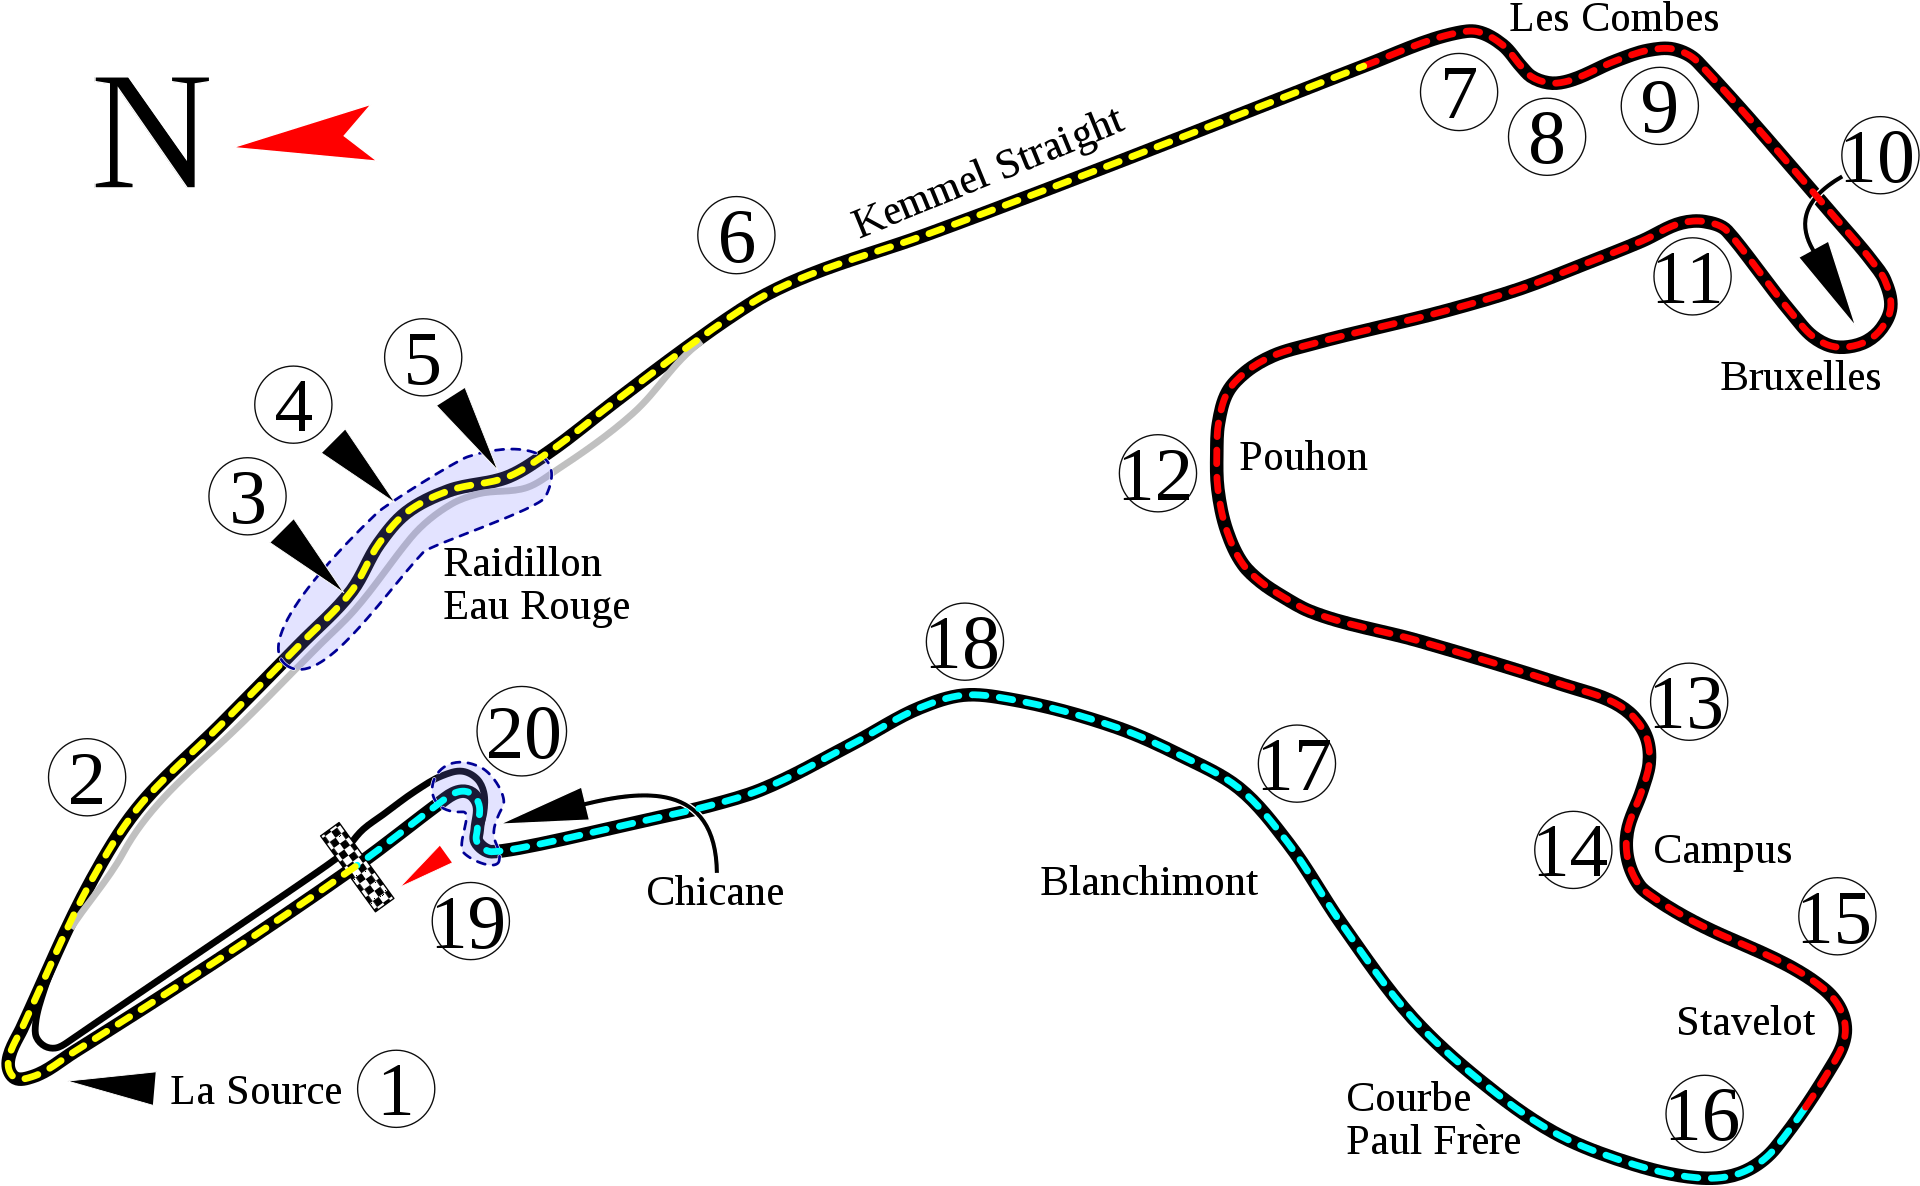 1920px-Spa-Francorchamps_of_Belgium.svg.png